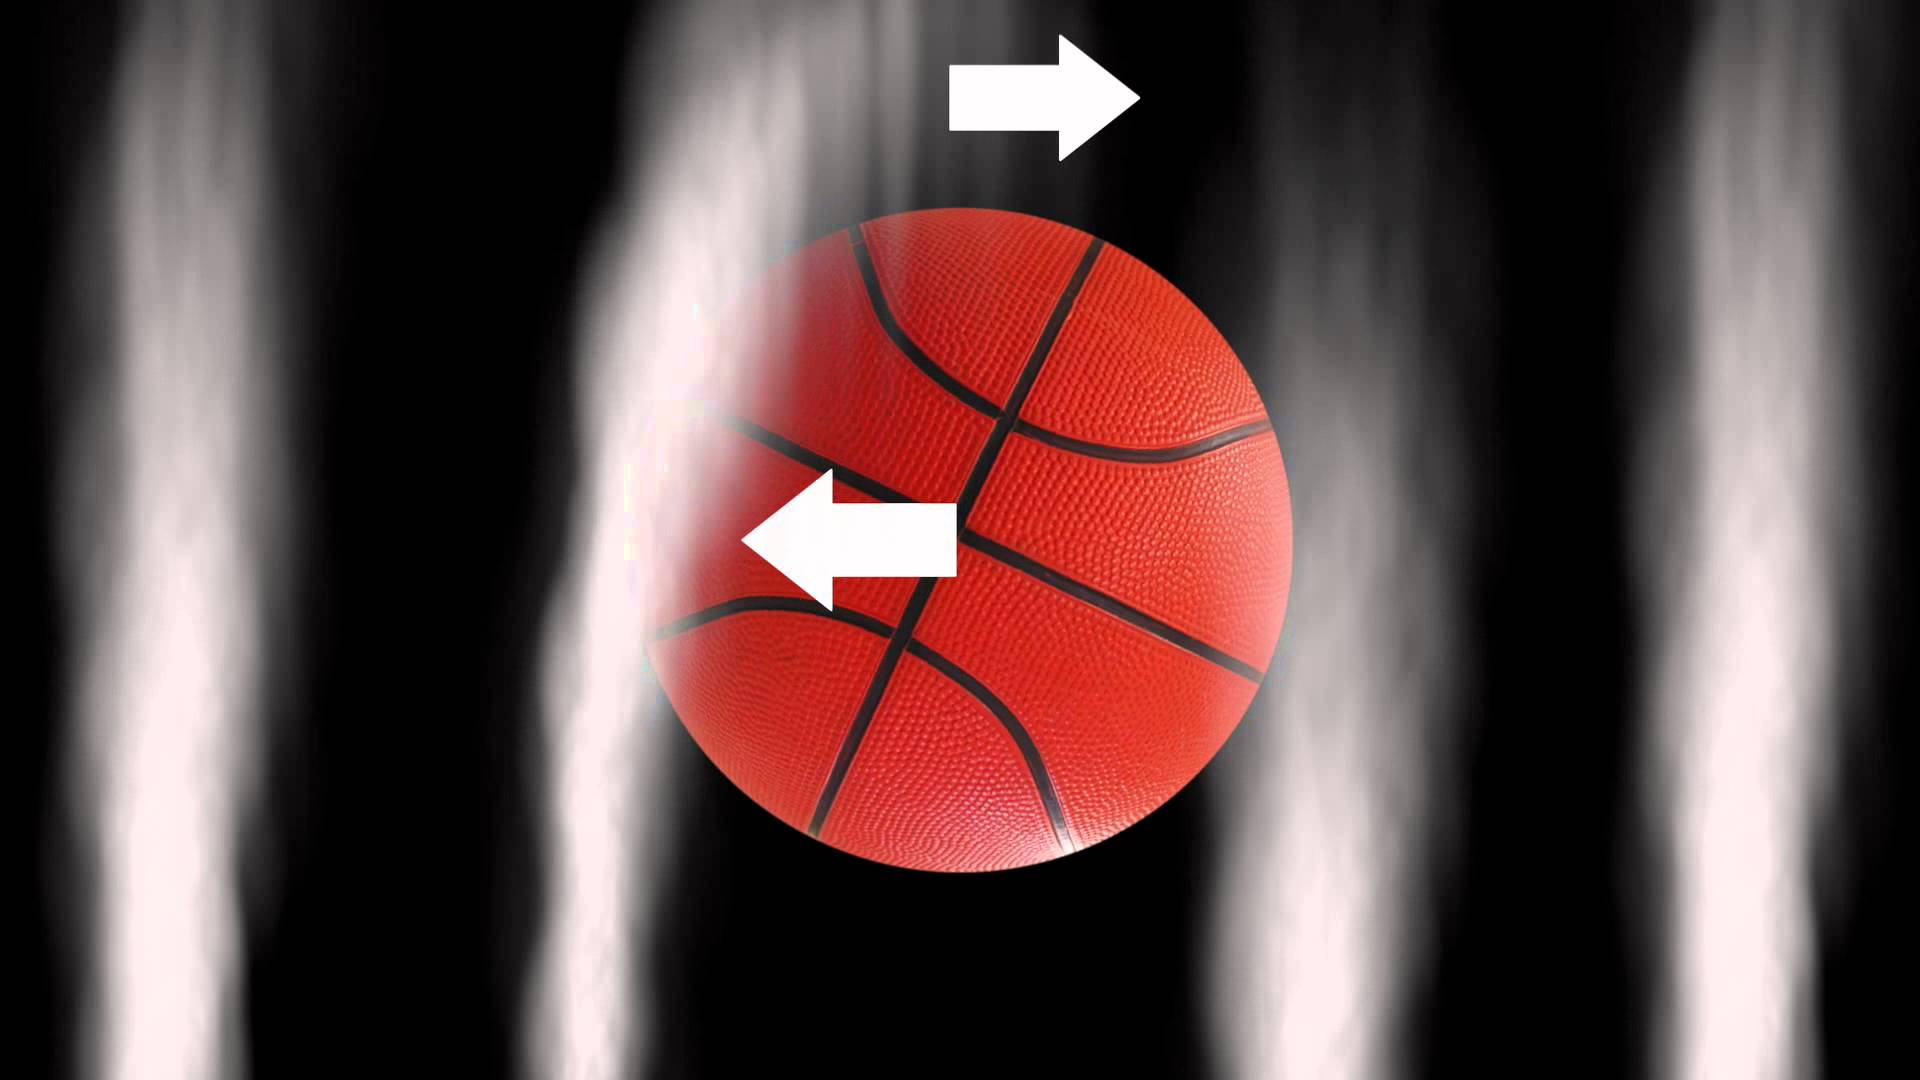 Mind Blowing: Basketball dropped from 400+ feet creating Magnus Effect